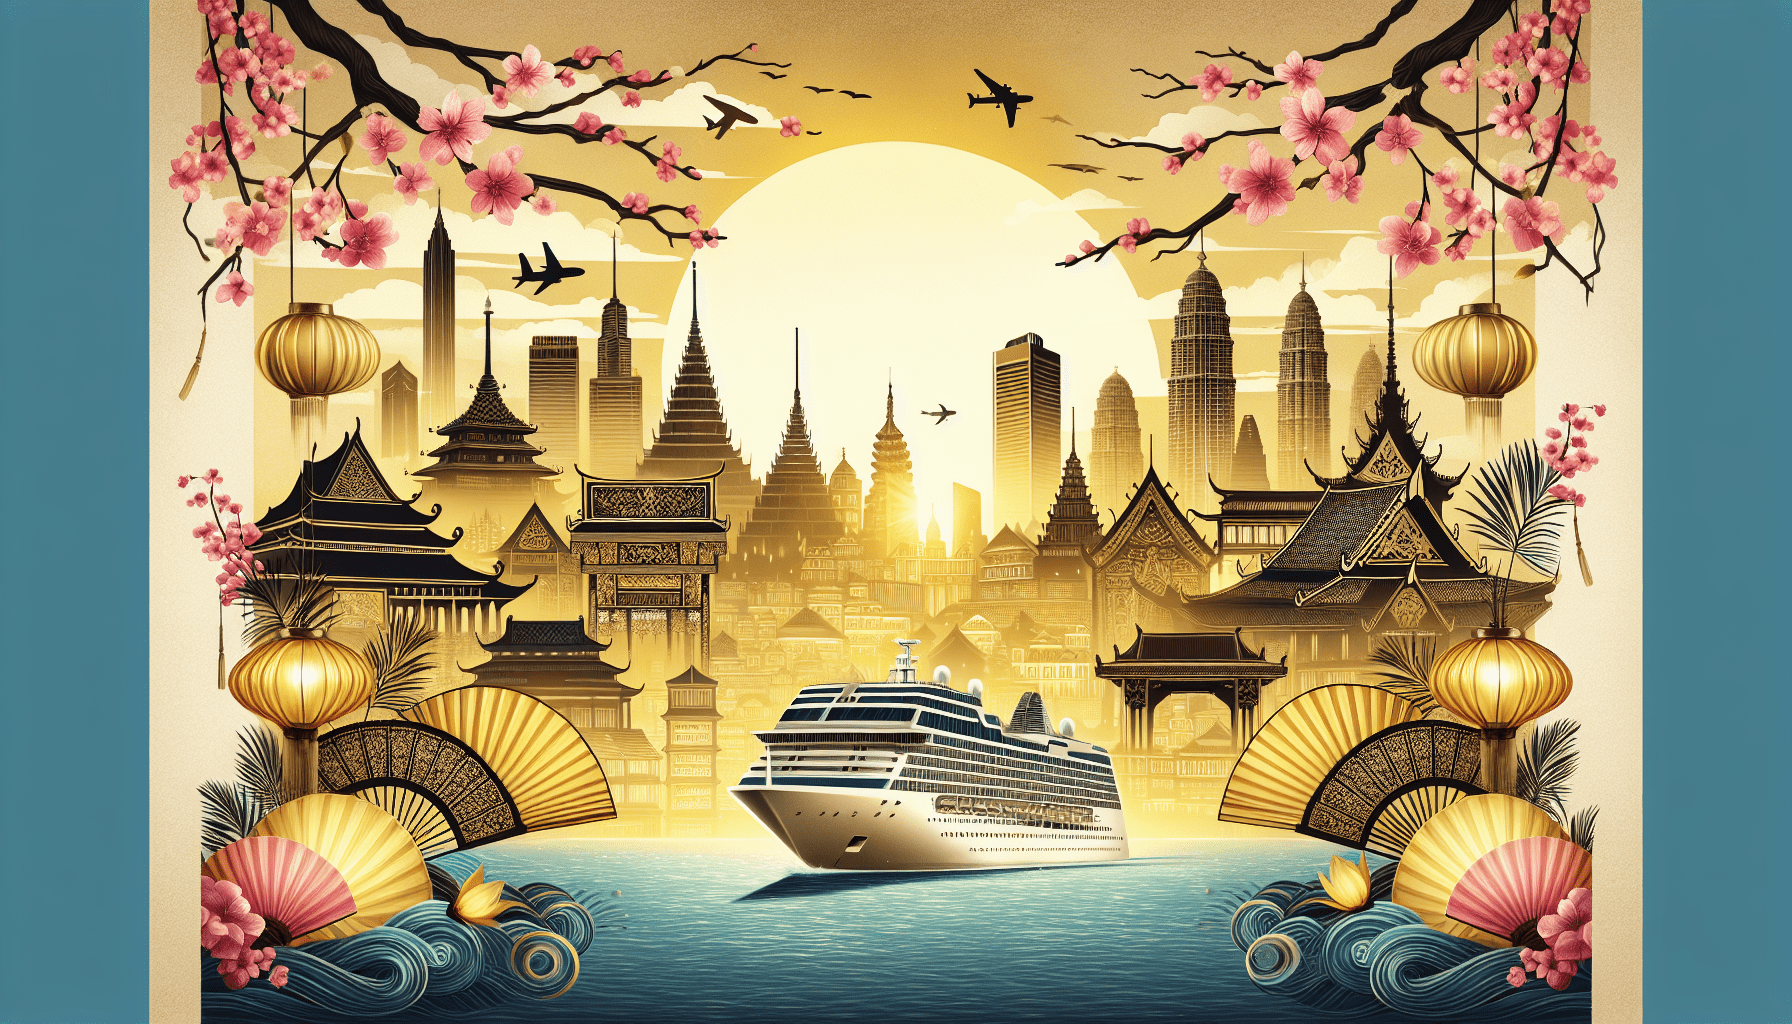 Which Are The Two Popular Ports For Cruising In Asia?